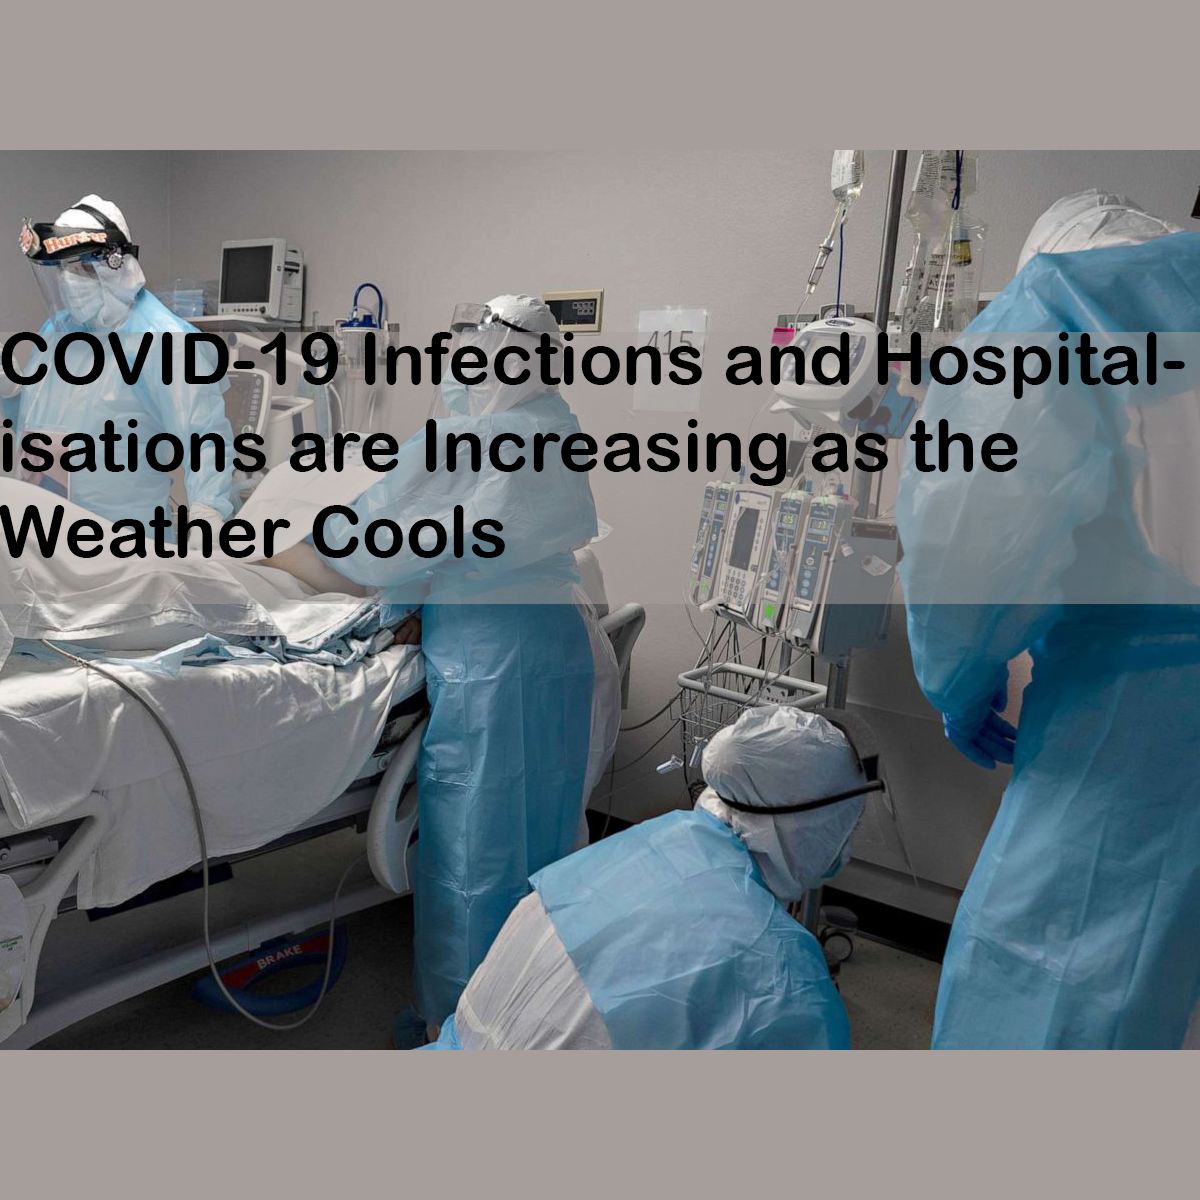 COVID-19 Infections and Hospitalisations are Increasing as the Weather Cools